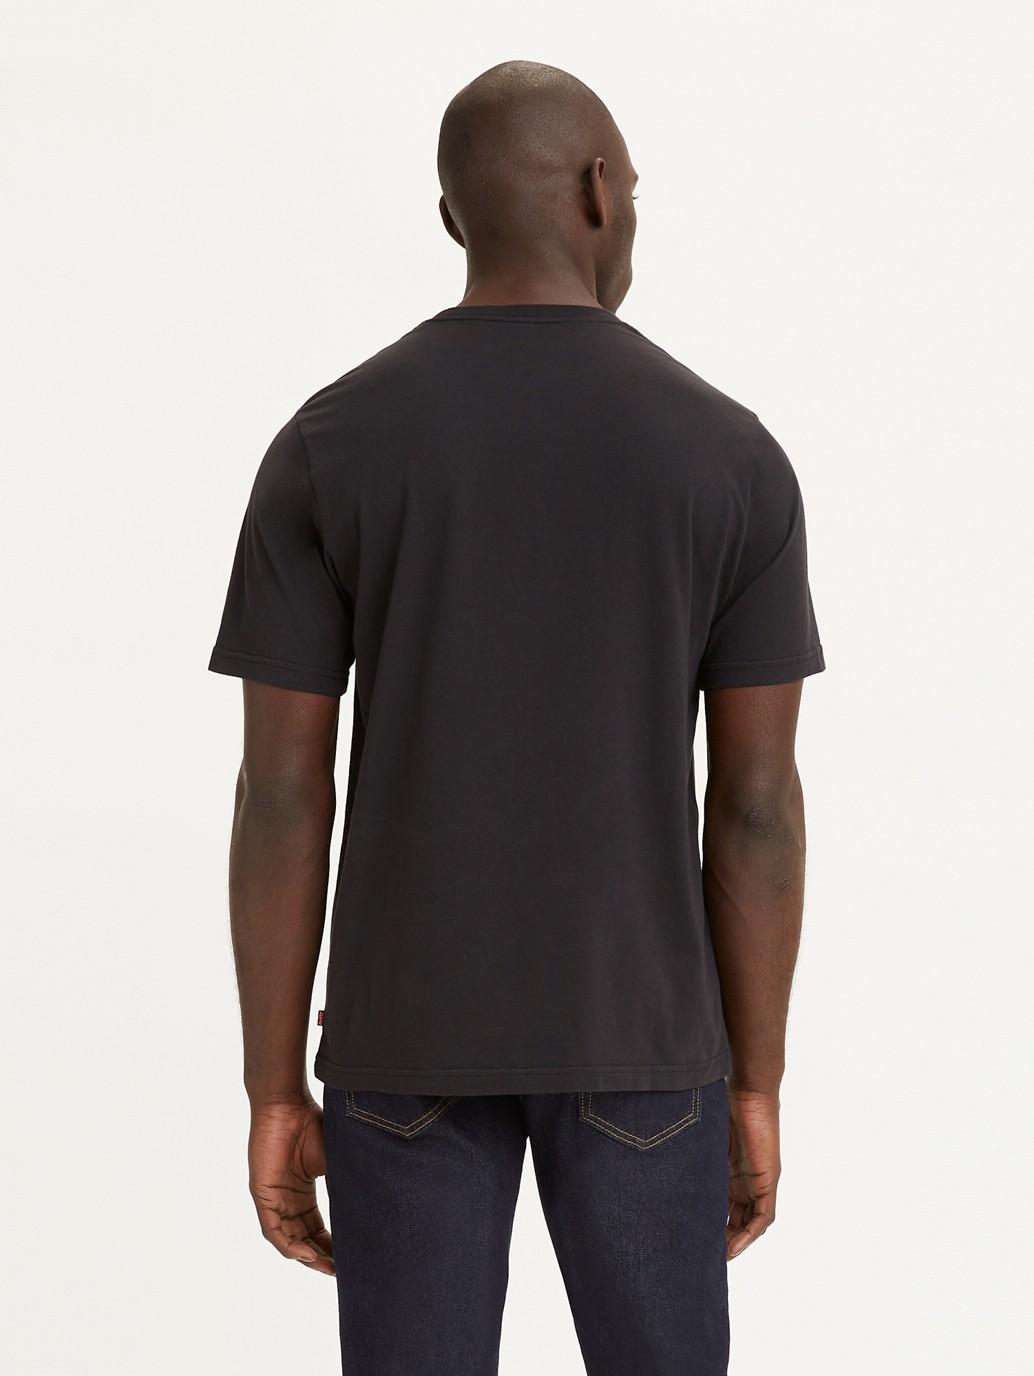 Buy Levi's® Men's Relaxed Short-Sleeve Graphic T-Shirt| Levi's ...